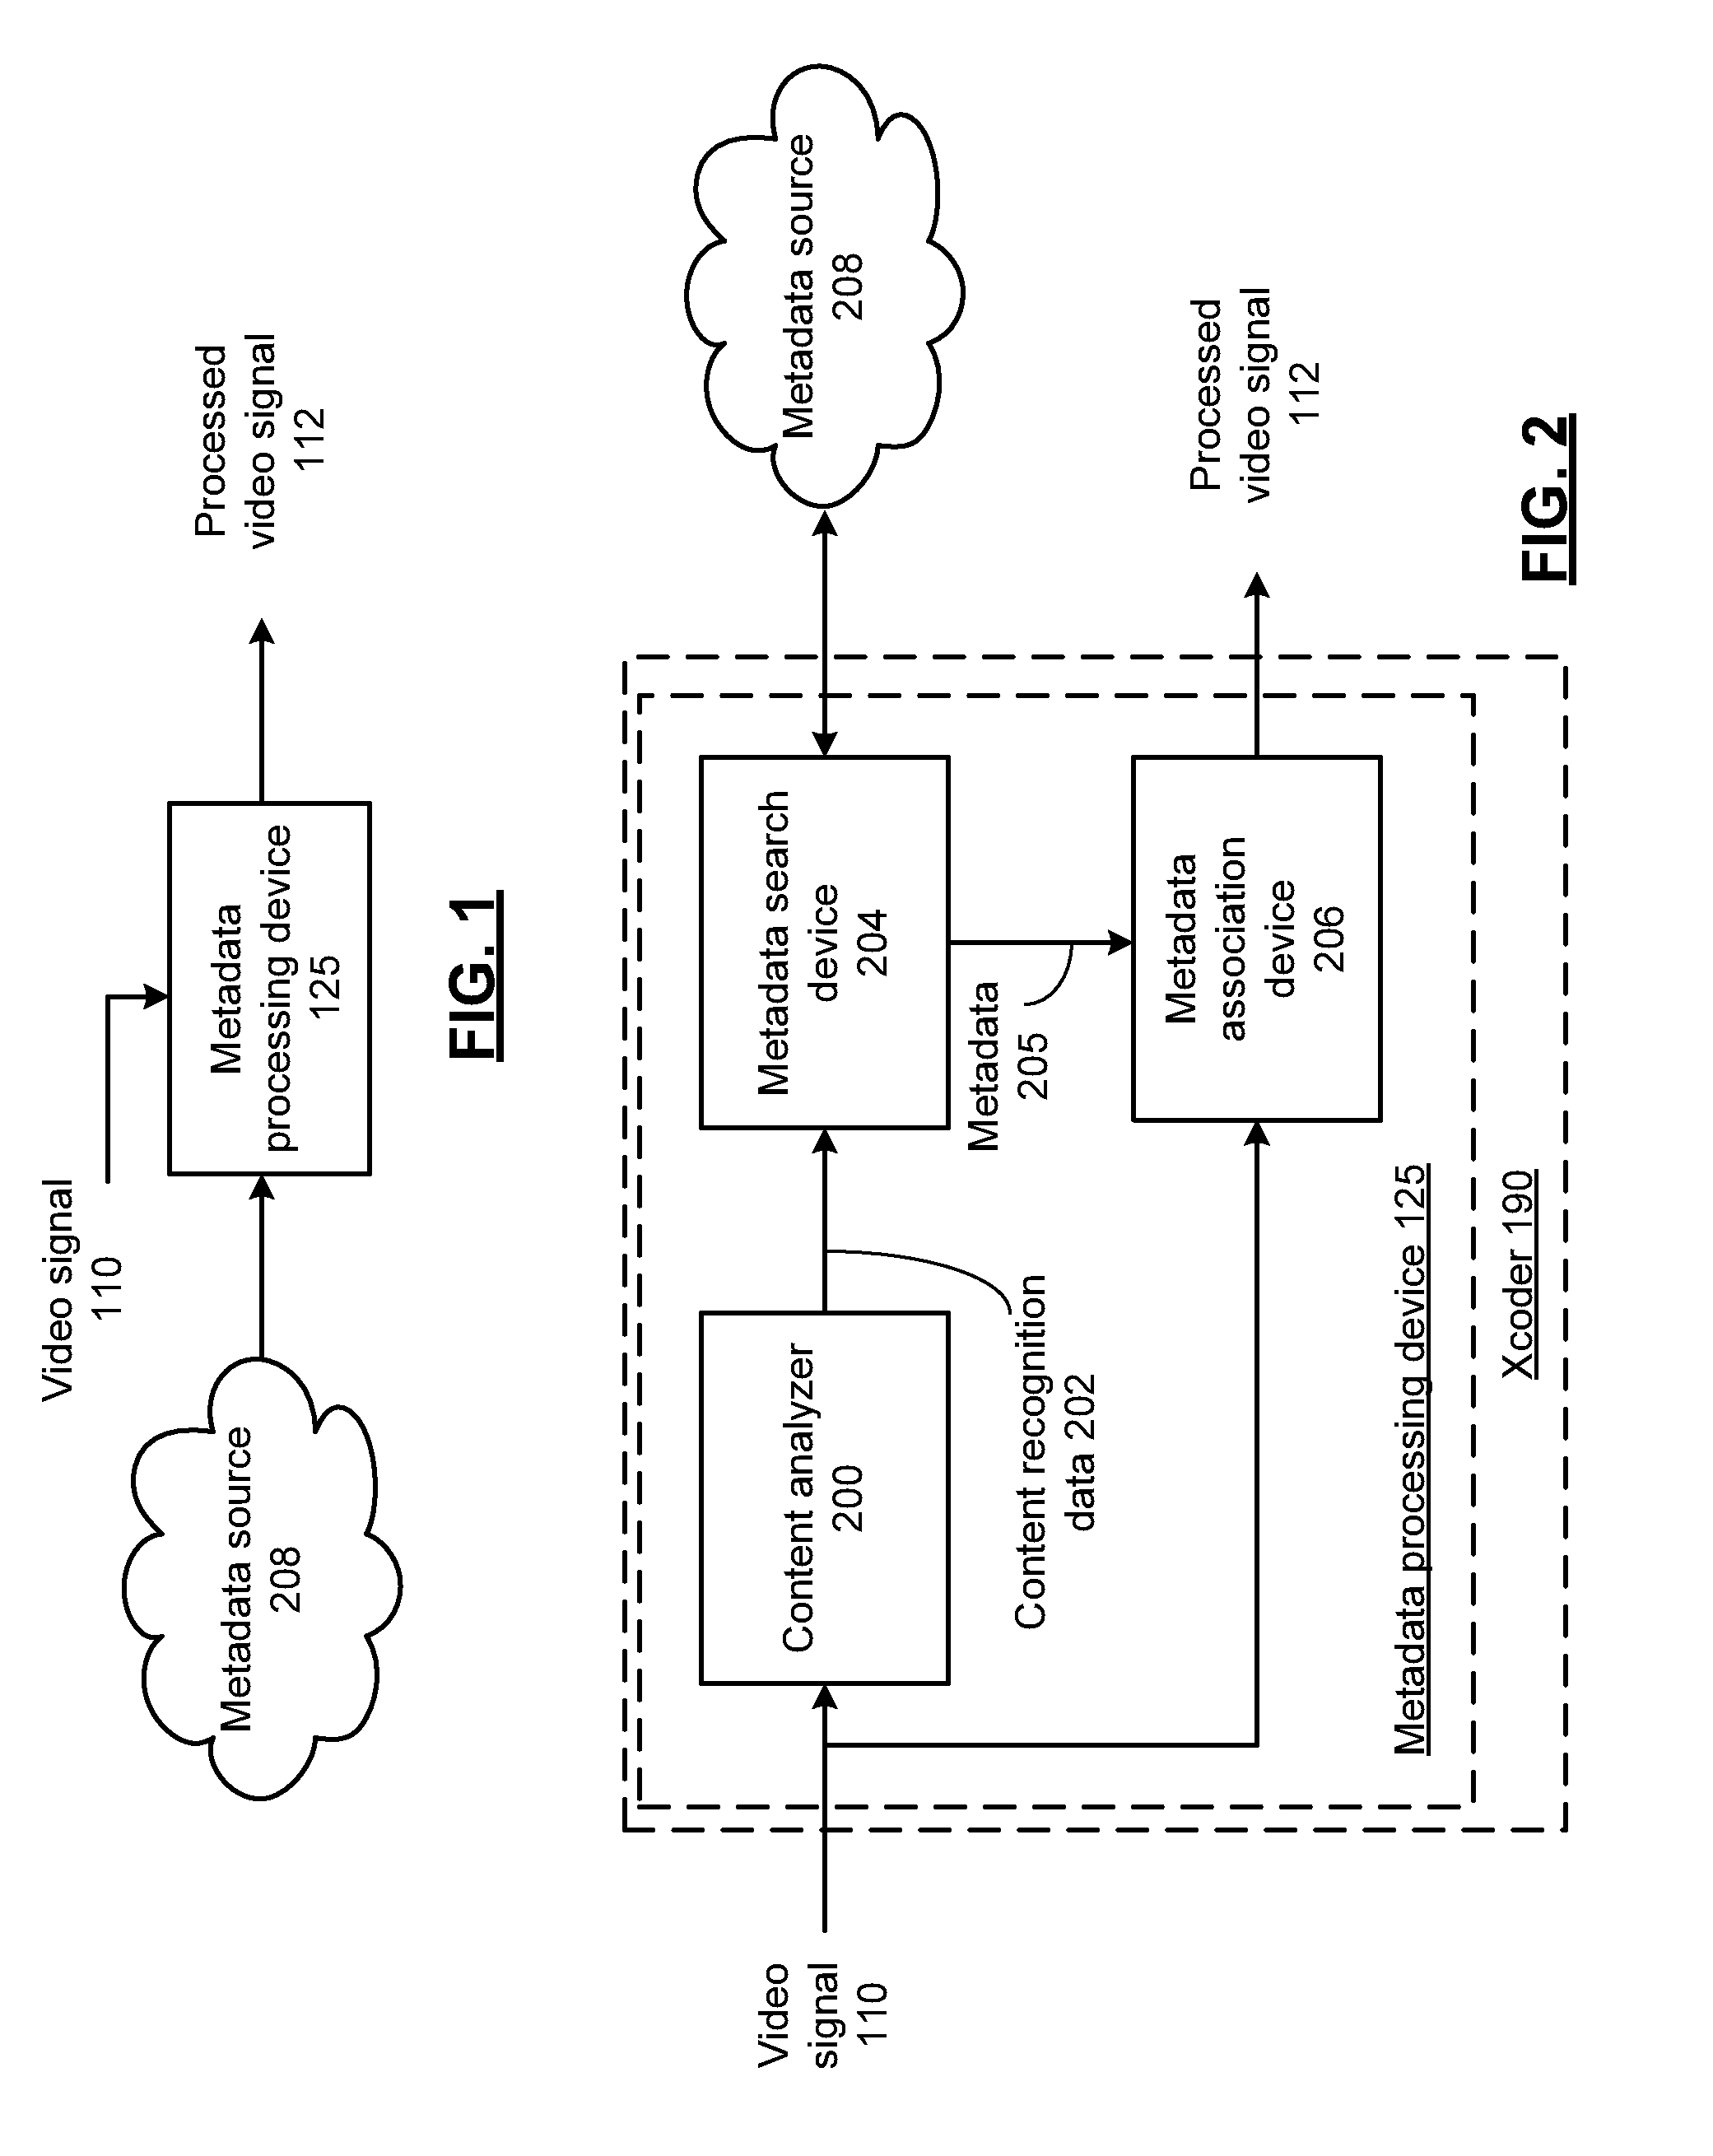 Video processing device for embedding time-coded metadata and methods for use therewith